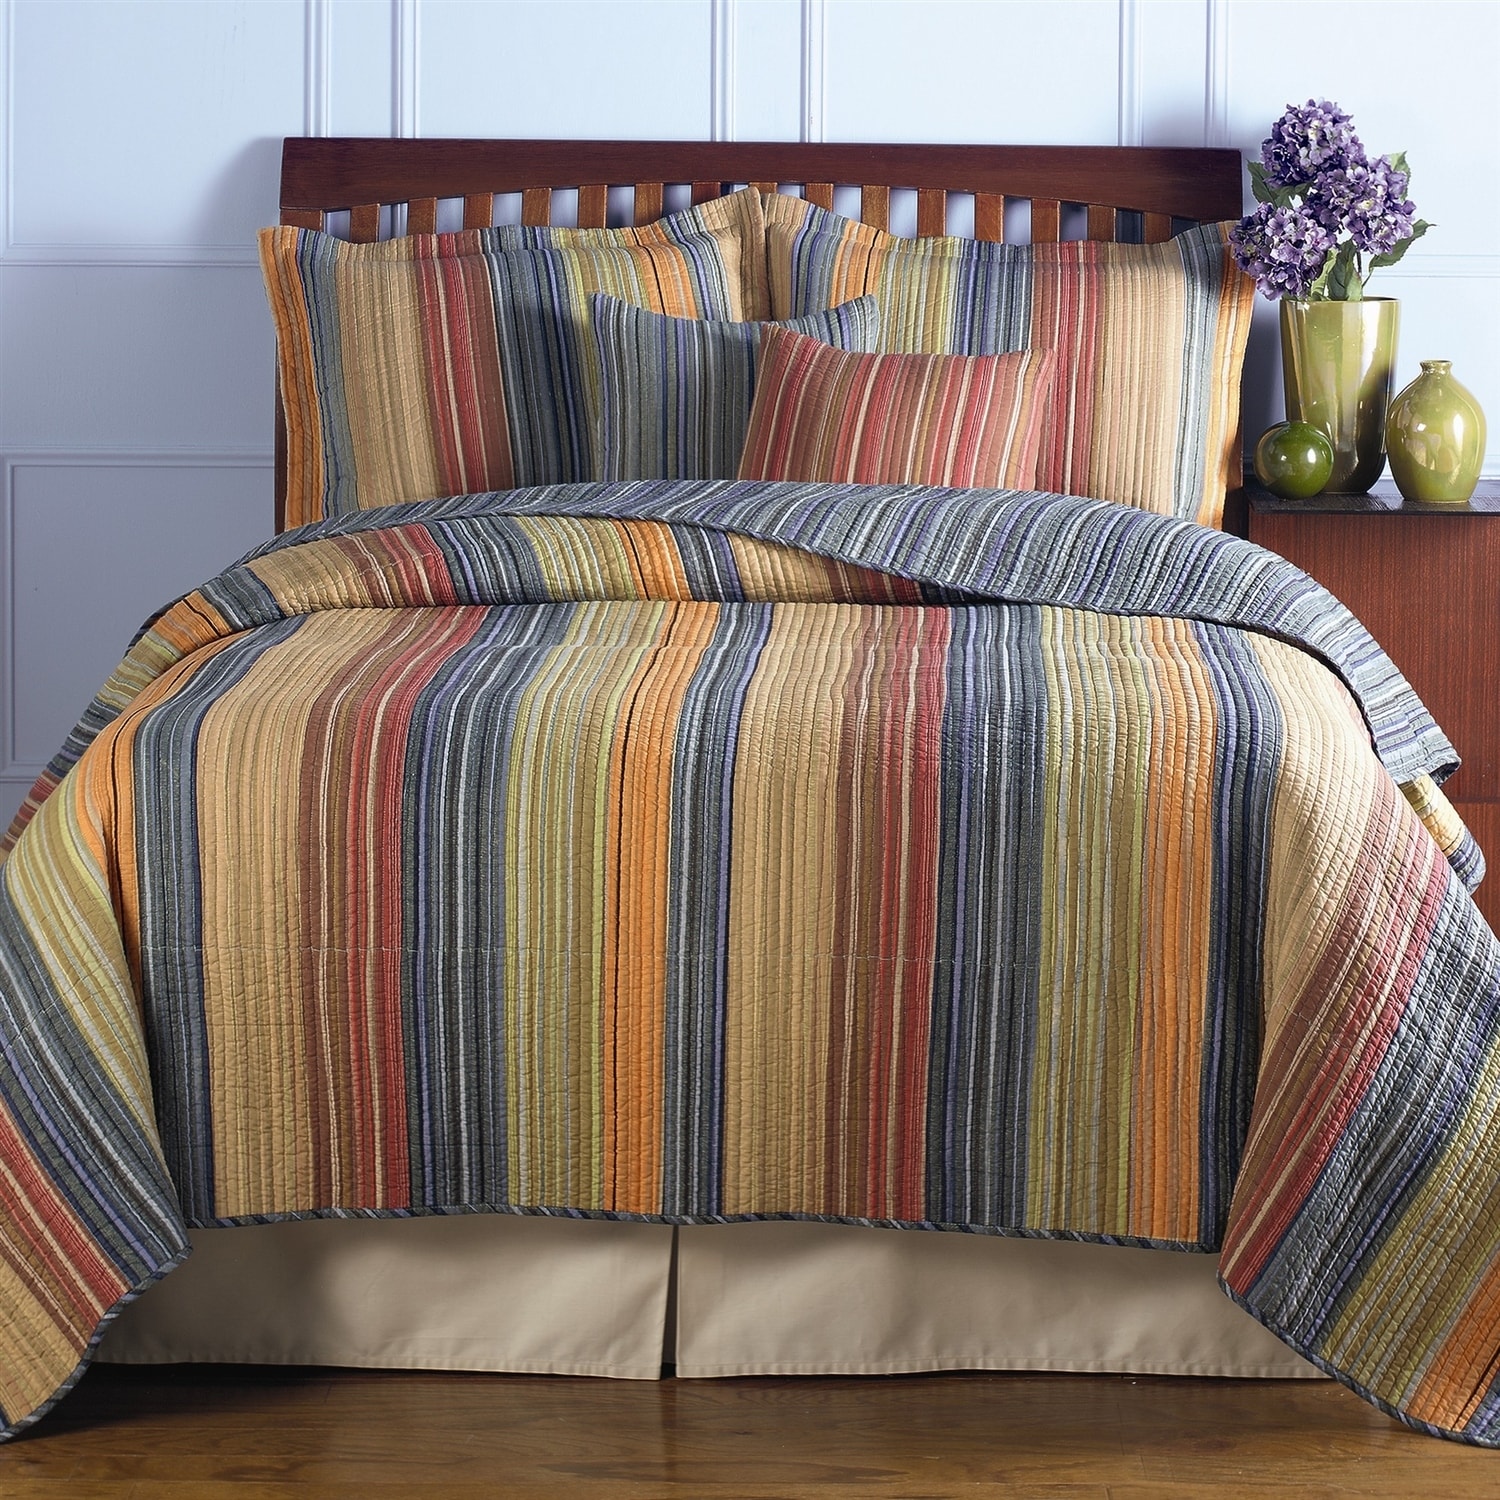 blue and brown striped bedroom